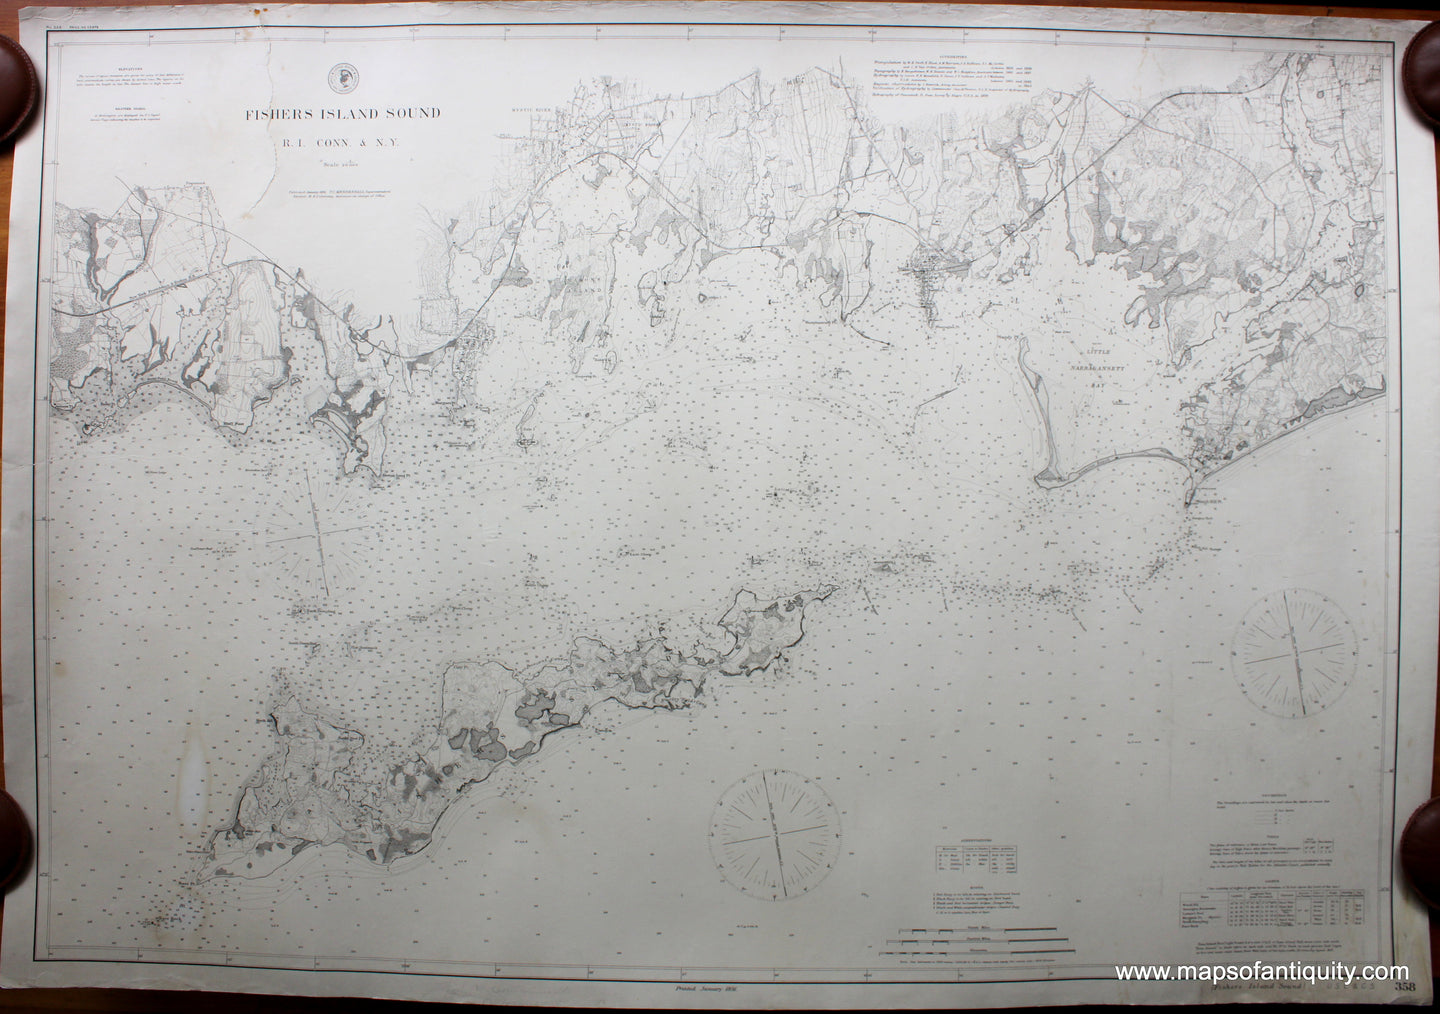 Antique-Black-and-White-Nautical-Chart-Fishers-Island-Sound-R.I.-Conn.-N.Y.-**********-Nautical-Charts-US--Northeast-Charts-1891-USC&GS-Maps-Of-Antiquity